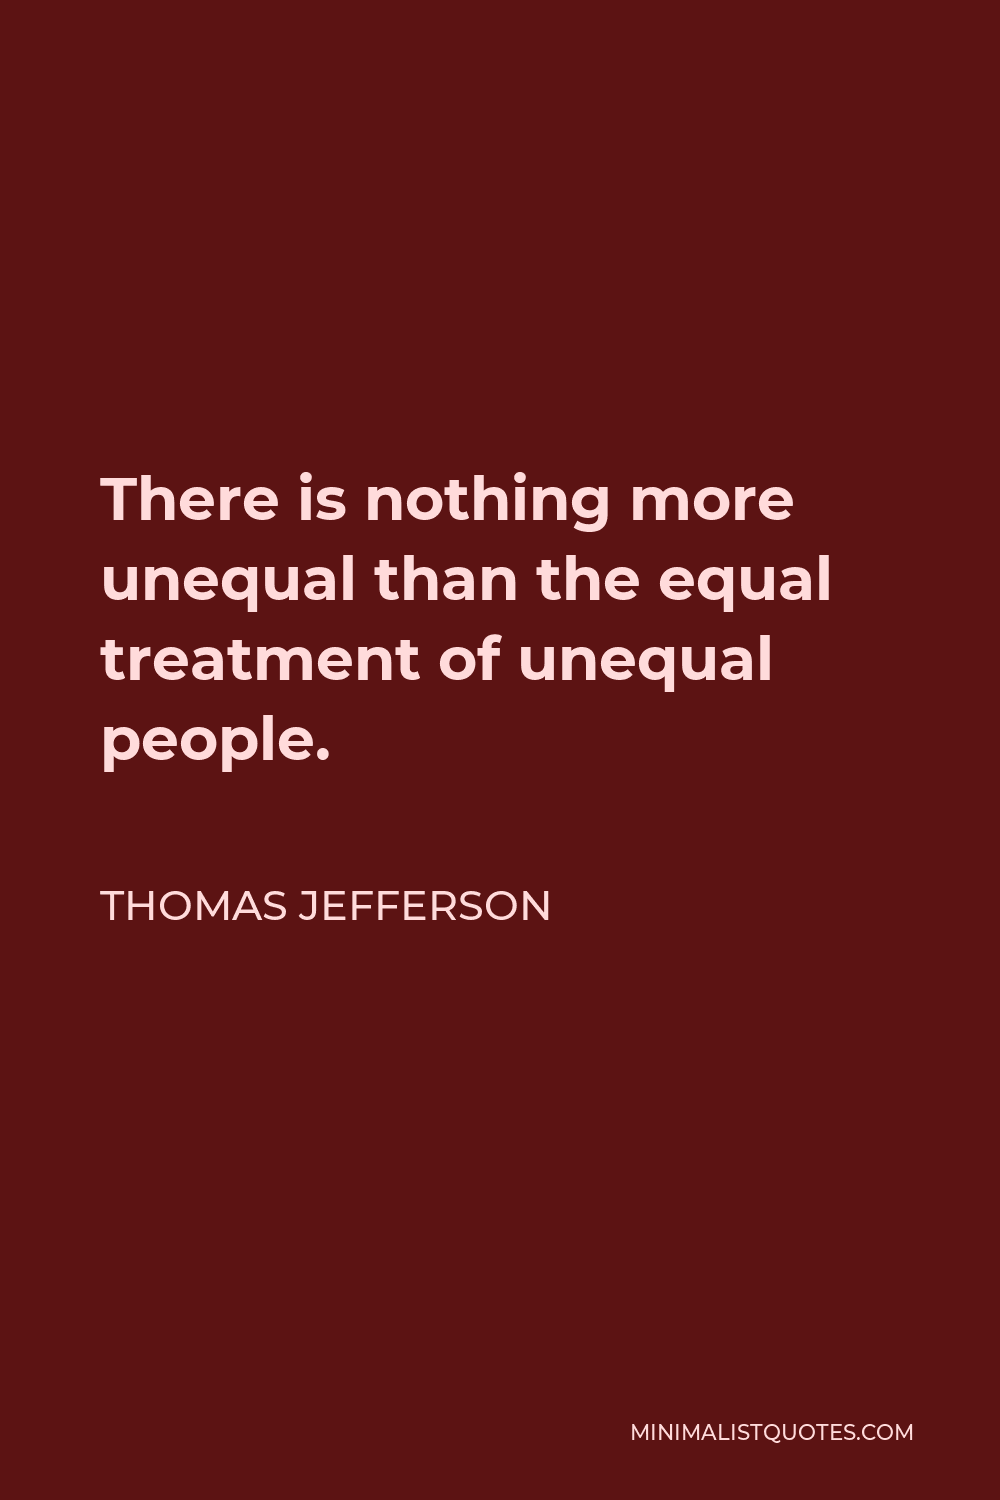 Thomas Jefferson Quote - There is nothing more unequal than the equal treatment of unequal people.